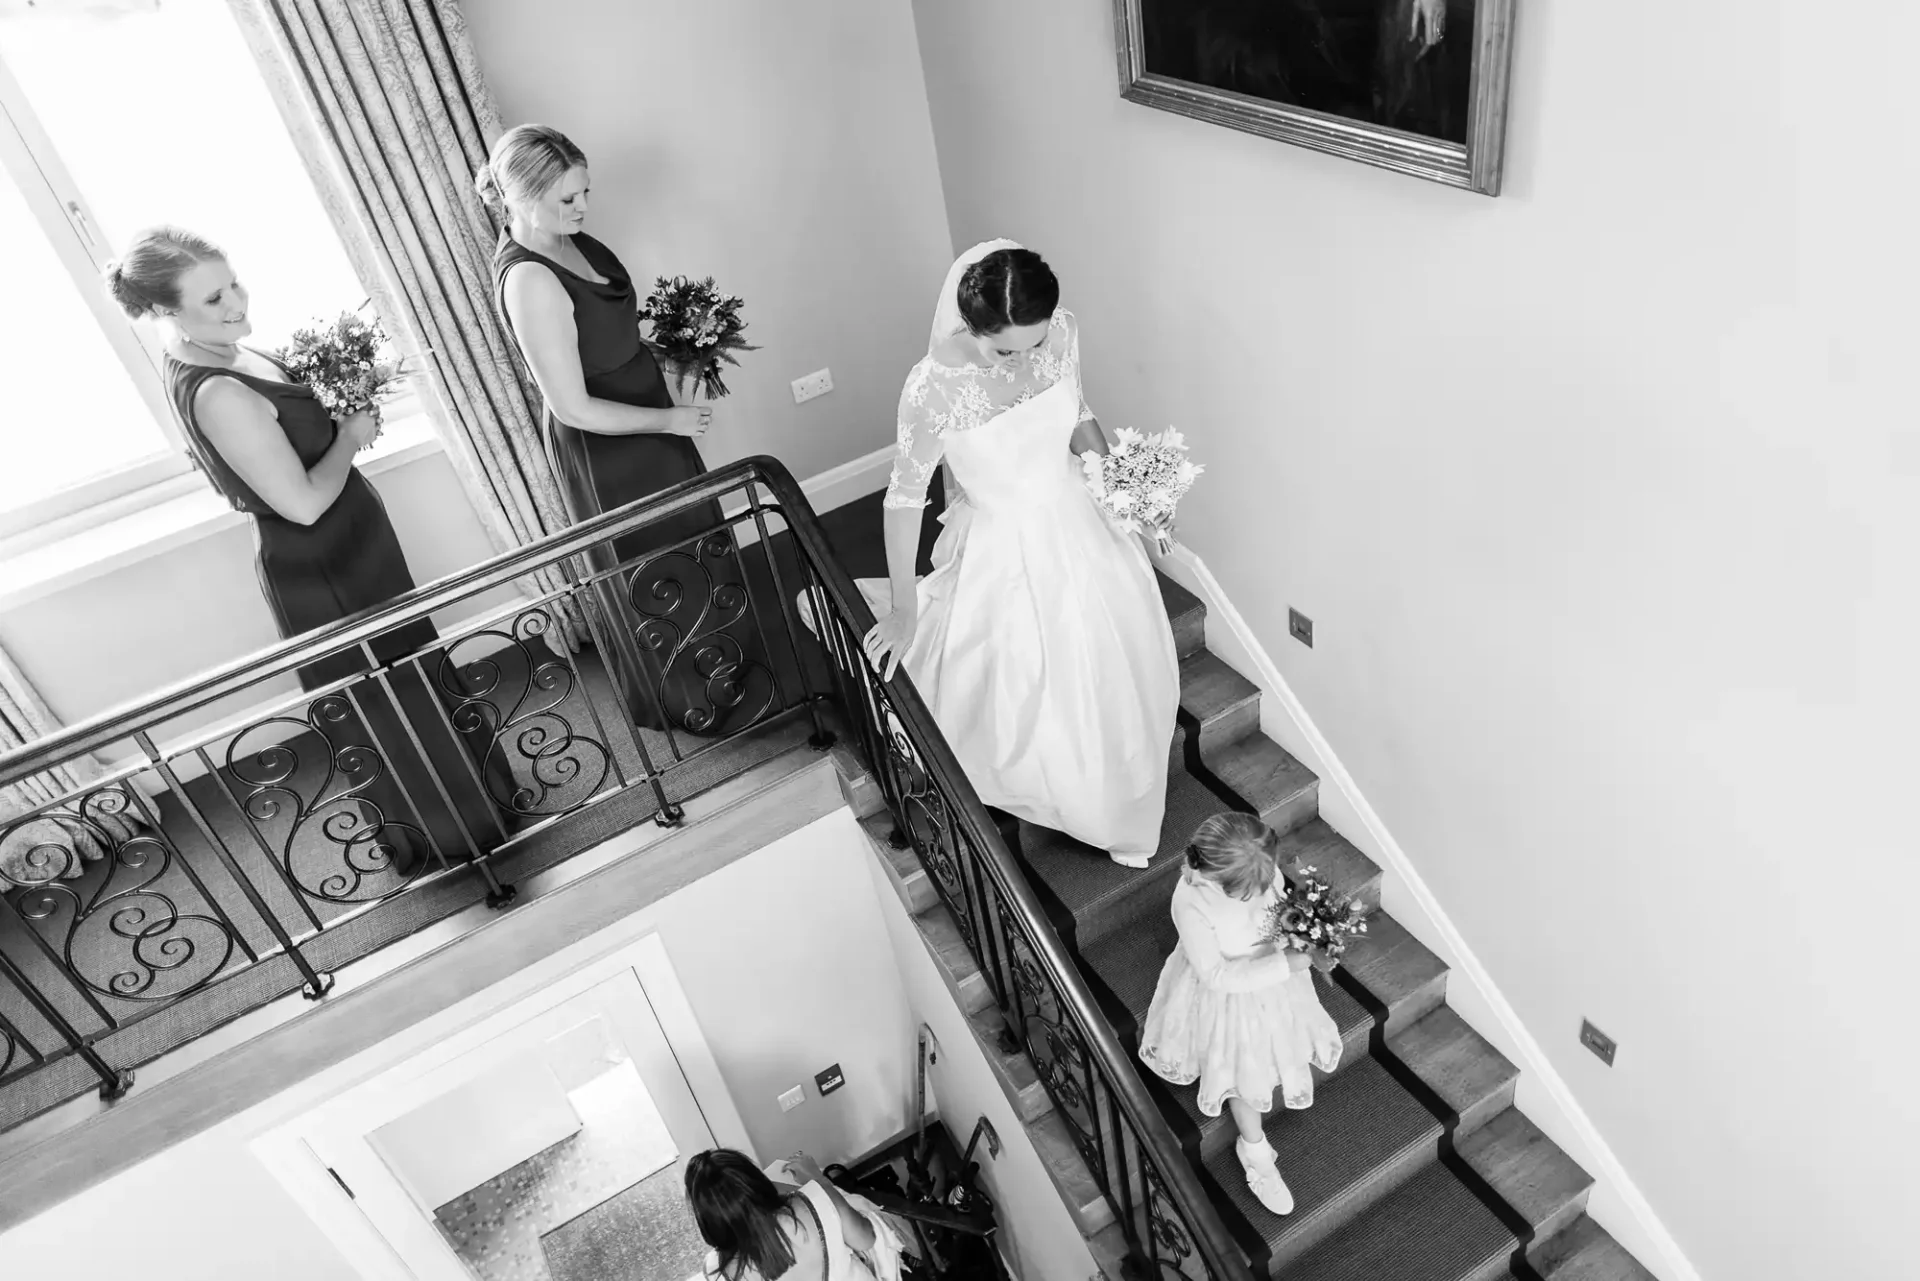 A bride in a white gown descends a staircase followed by bridesmaids and a young flower girl in a bright room, captured in black and white.